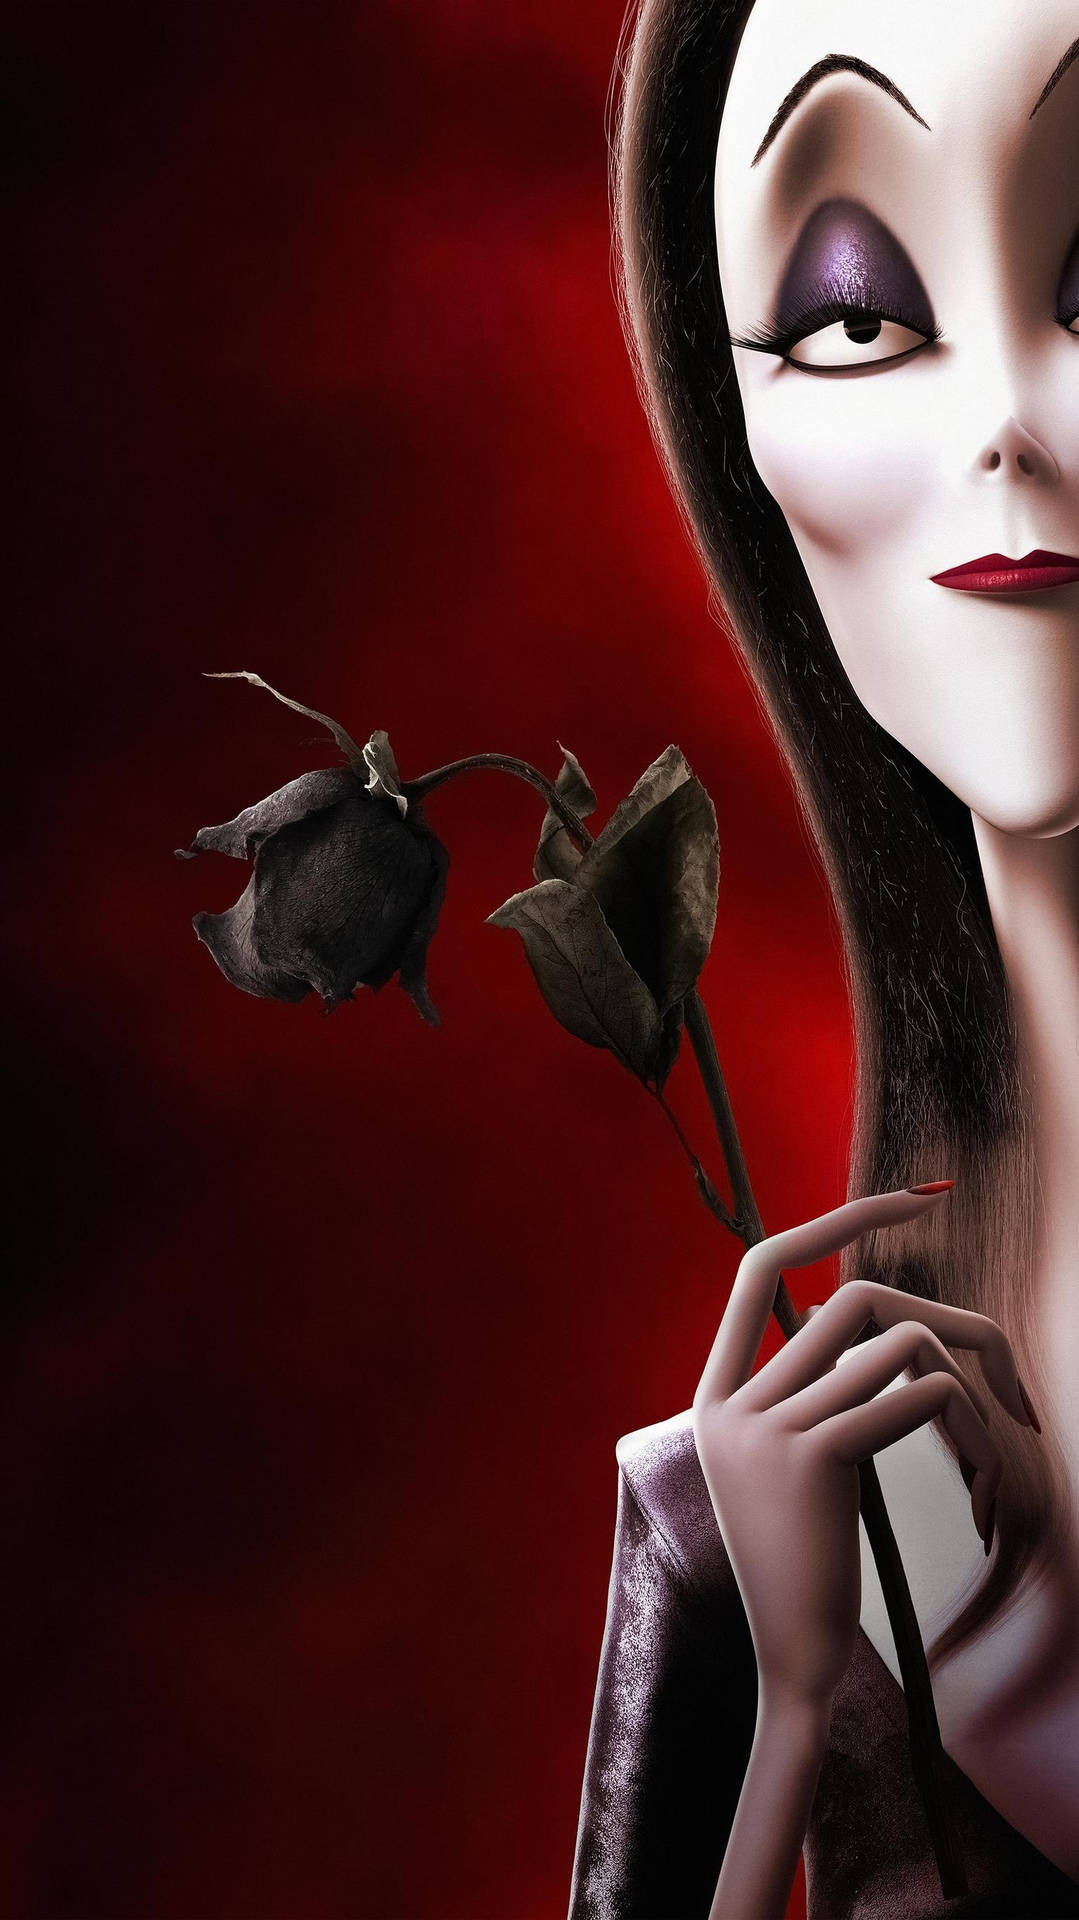 Morticia Holding Dried Rose The Addams Family 2 Wallpaper